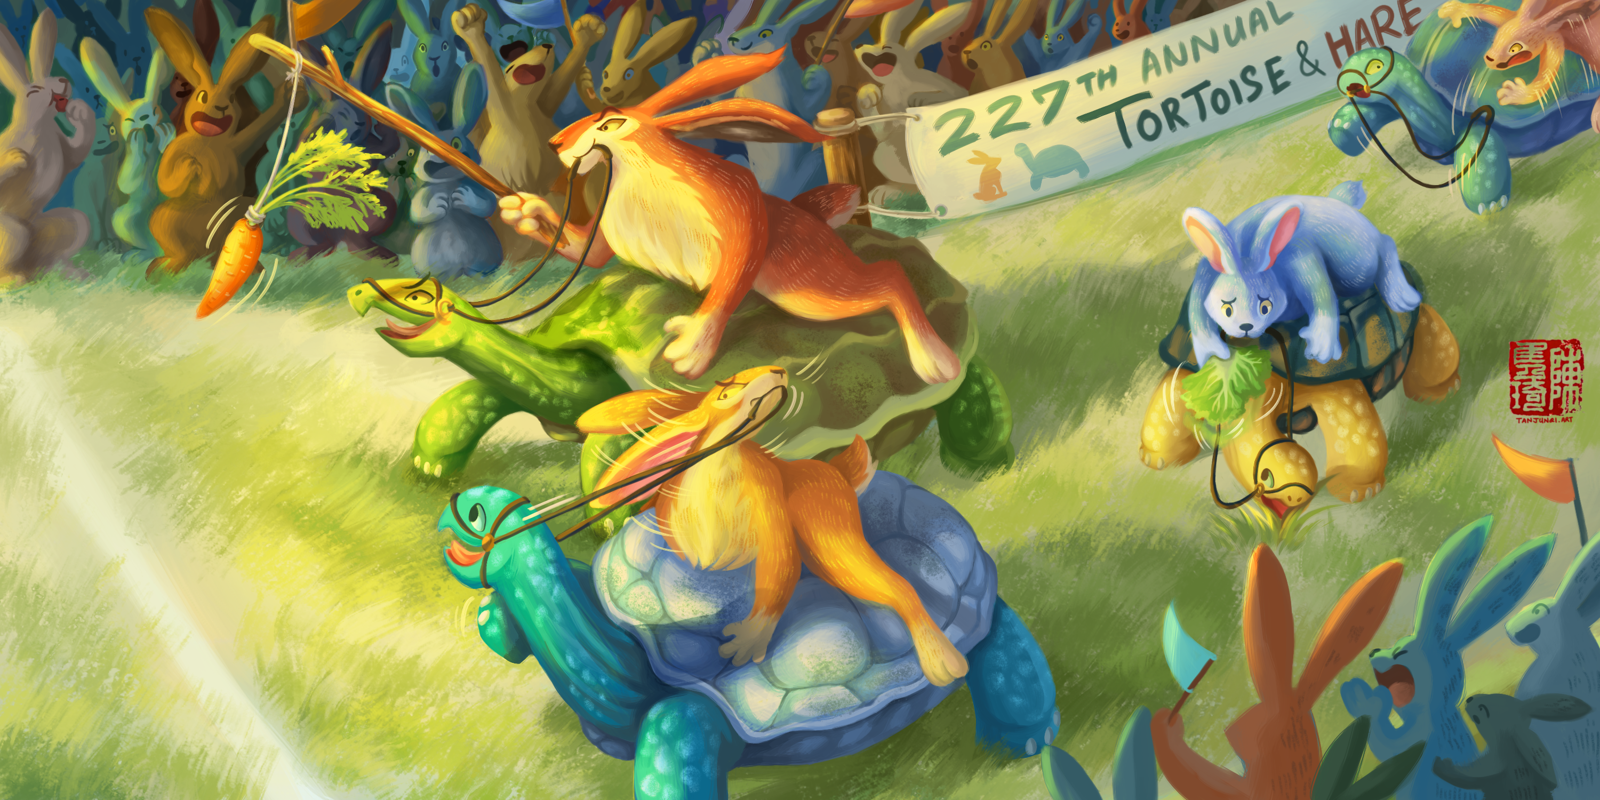 A digital painting of a tortoise-and-hare road race. Four hares are riding on their tortoise steeds and slowly inching towards the finish line on the left as the sunset casts its yellow glow on them. The second dark red hare in the lead is baiting his tortoise with a carrot, while the leading tortoise gets tempted and is about to swerve in the wrong direction. Her orange-furred rider is tugging at her reins in an attempt to correct her. Behind them, a purple rabbit is worriedly waving a leaf of lettuce to get his tortoise, who had stopped to chew on a clump of grass, back on the right track. In the top right corner, the fourth rider has slipped and is falling off her tortoise's shell, much to the shock of the both of them. A crowded rabbit audience is cheering the racers on from both sides, waving flags and blowing whistles and shouting.